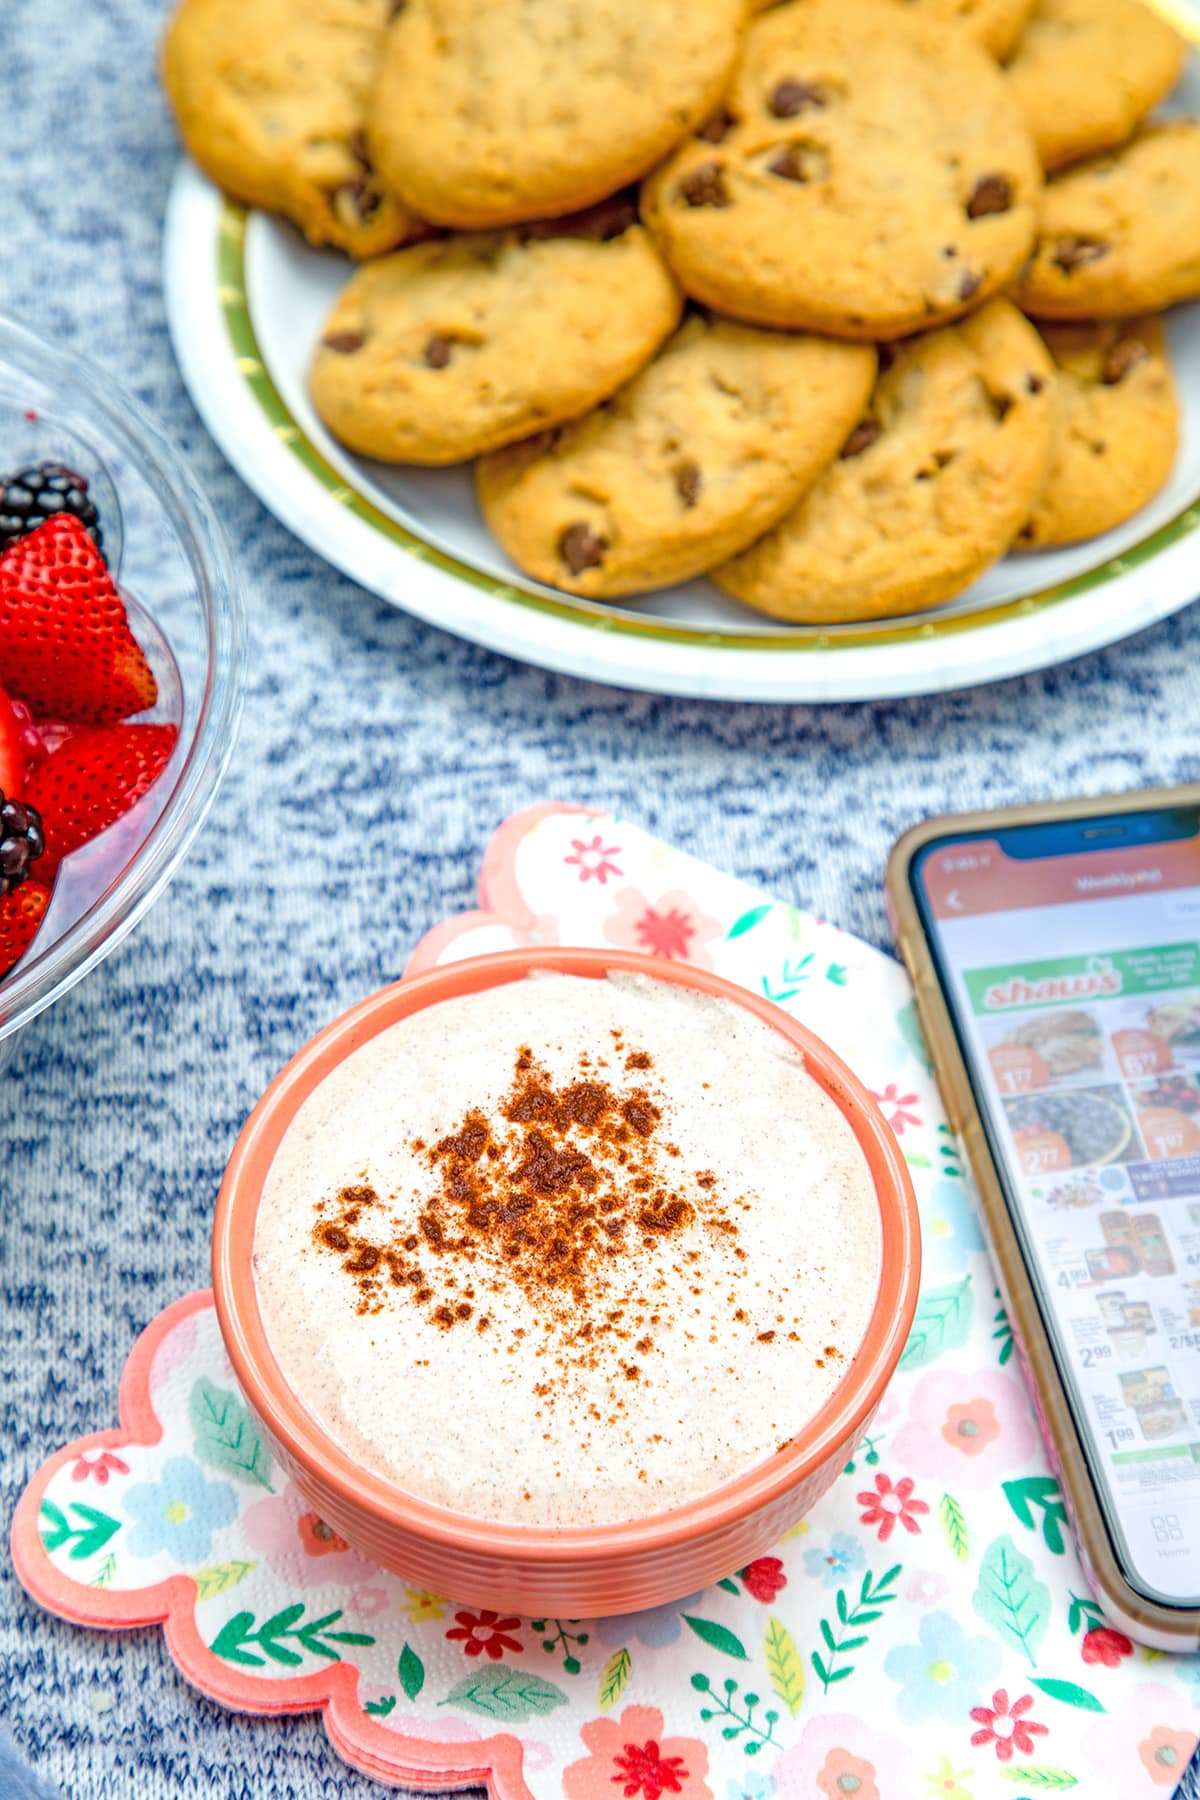 Small bowl of cinnamon dessert dip with plate of cookies in background and phone showing Shaw's app.